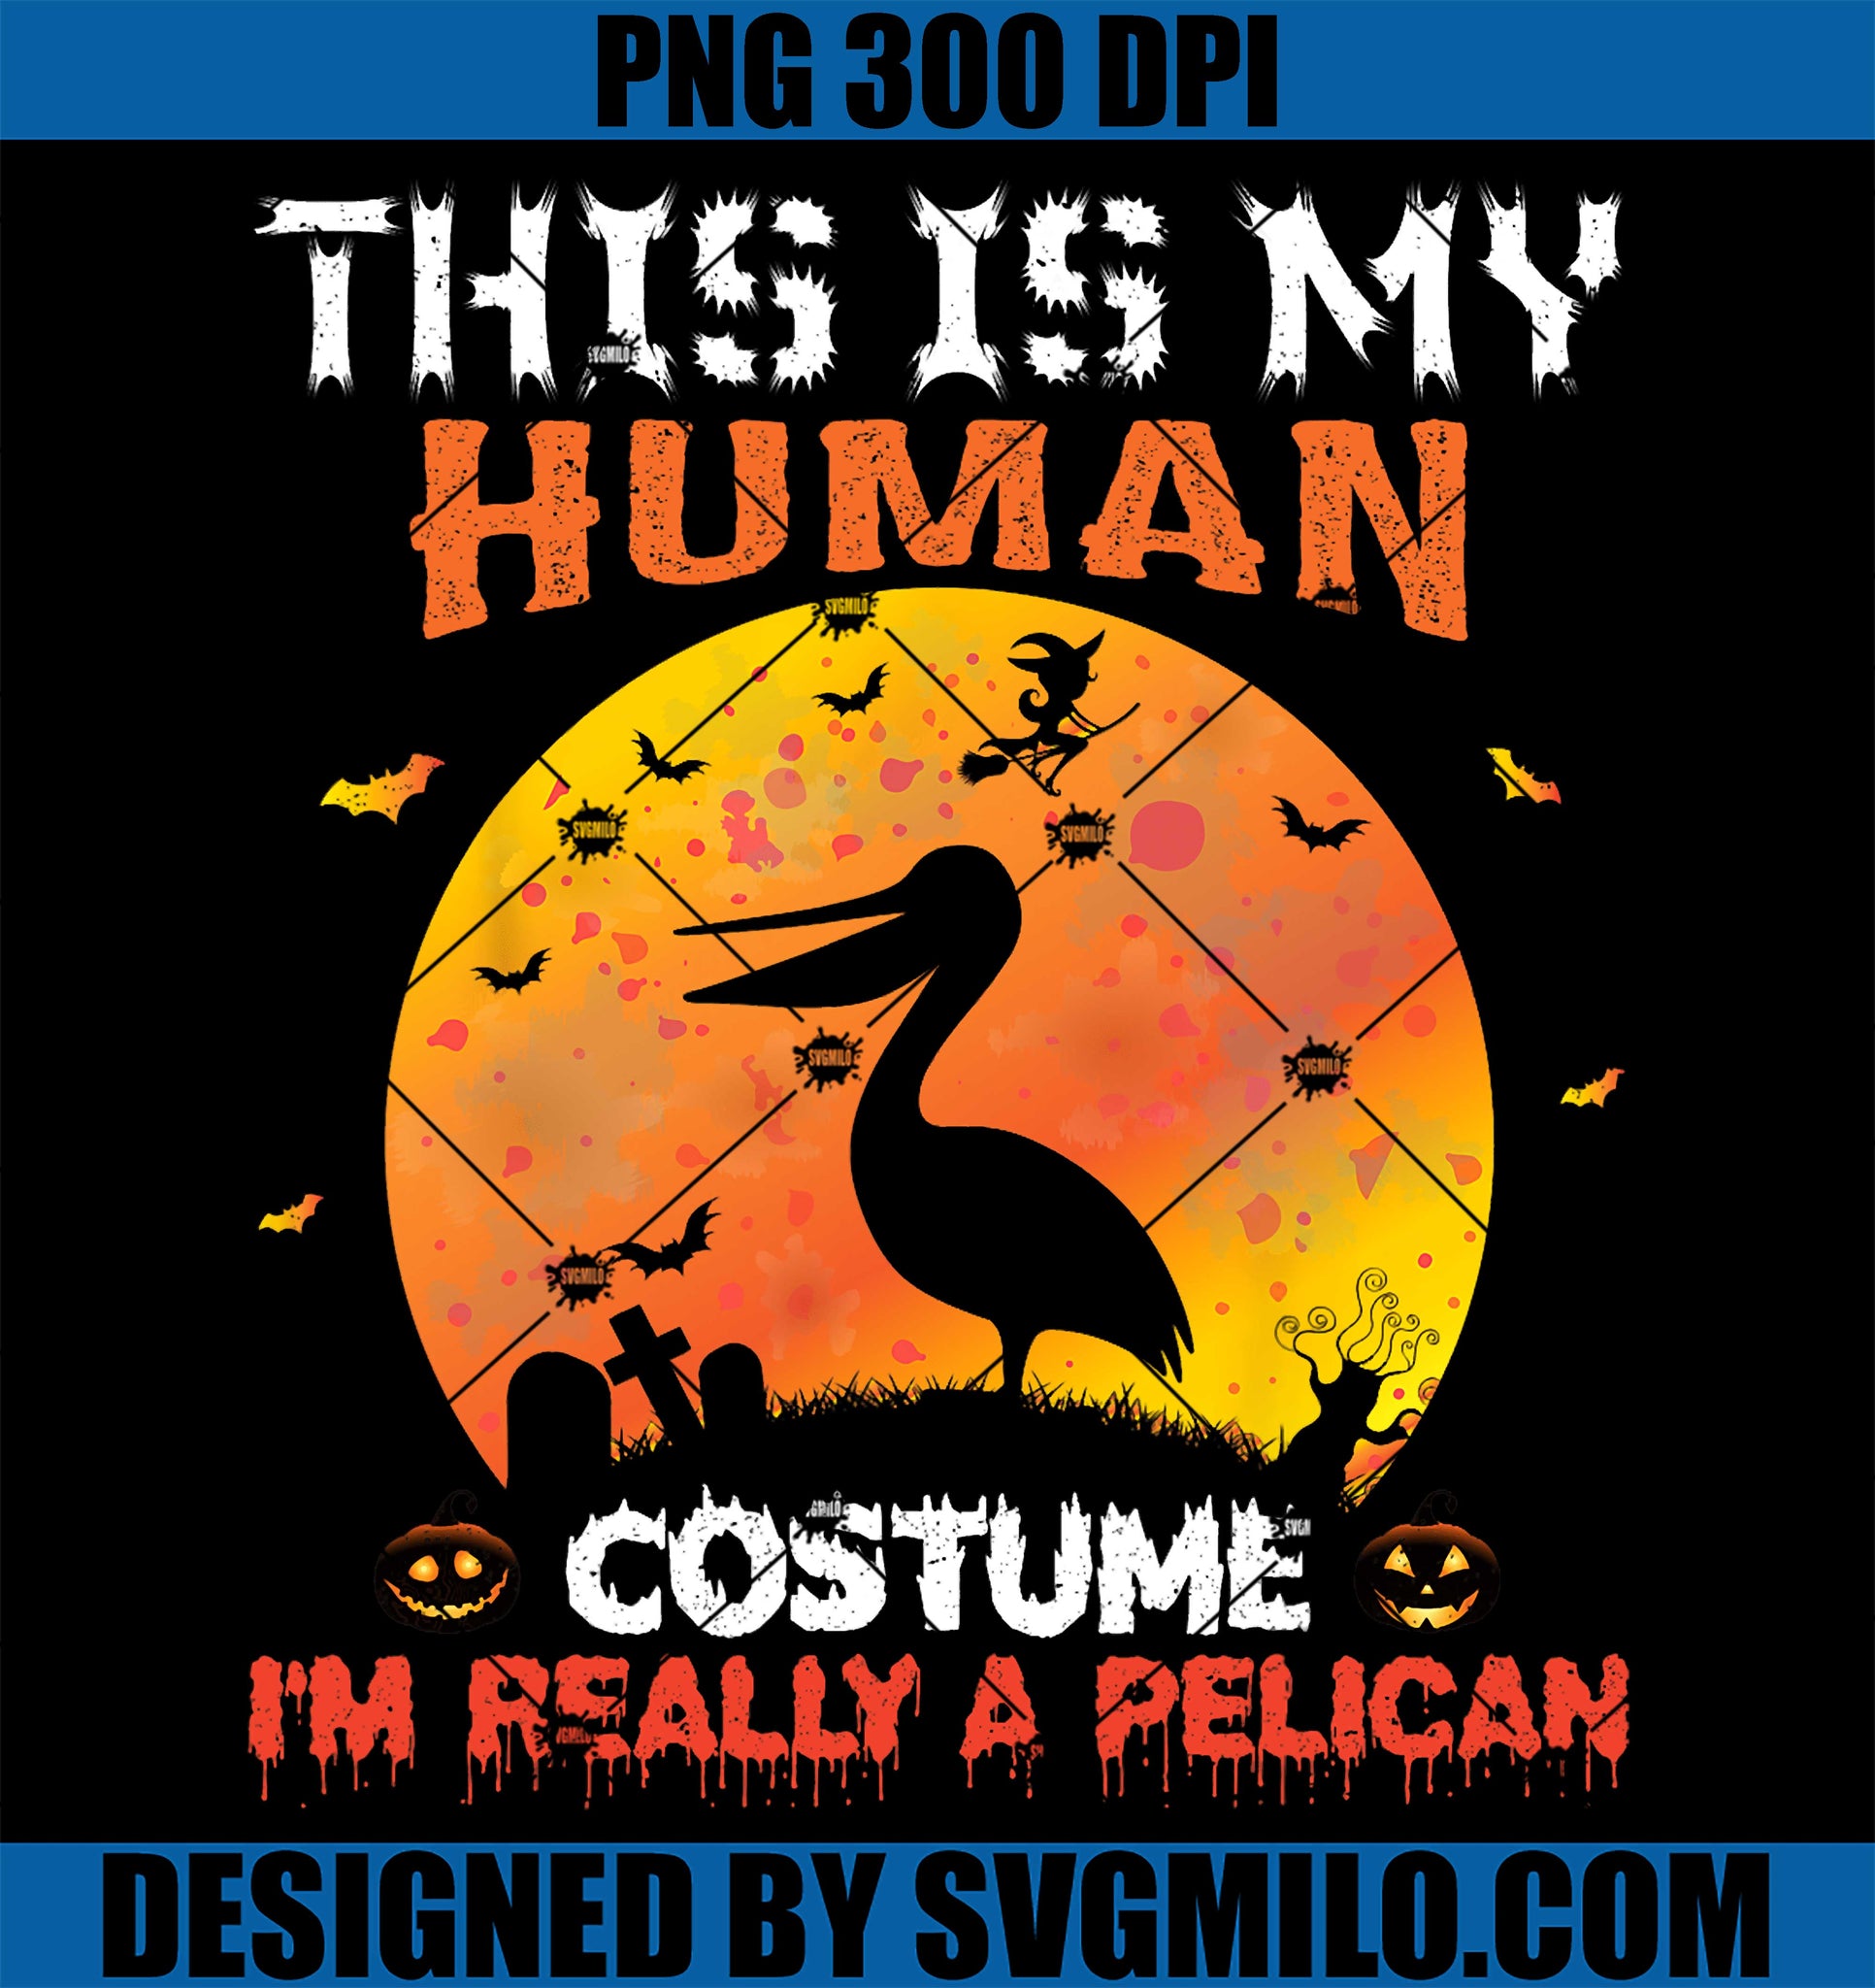 This Is My Human Costume I'm Really A Pelican PNG,Halloween PNG